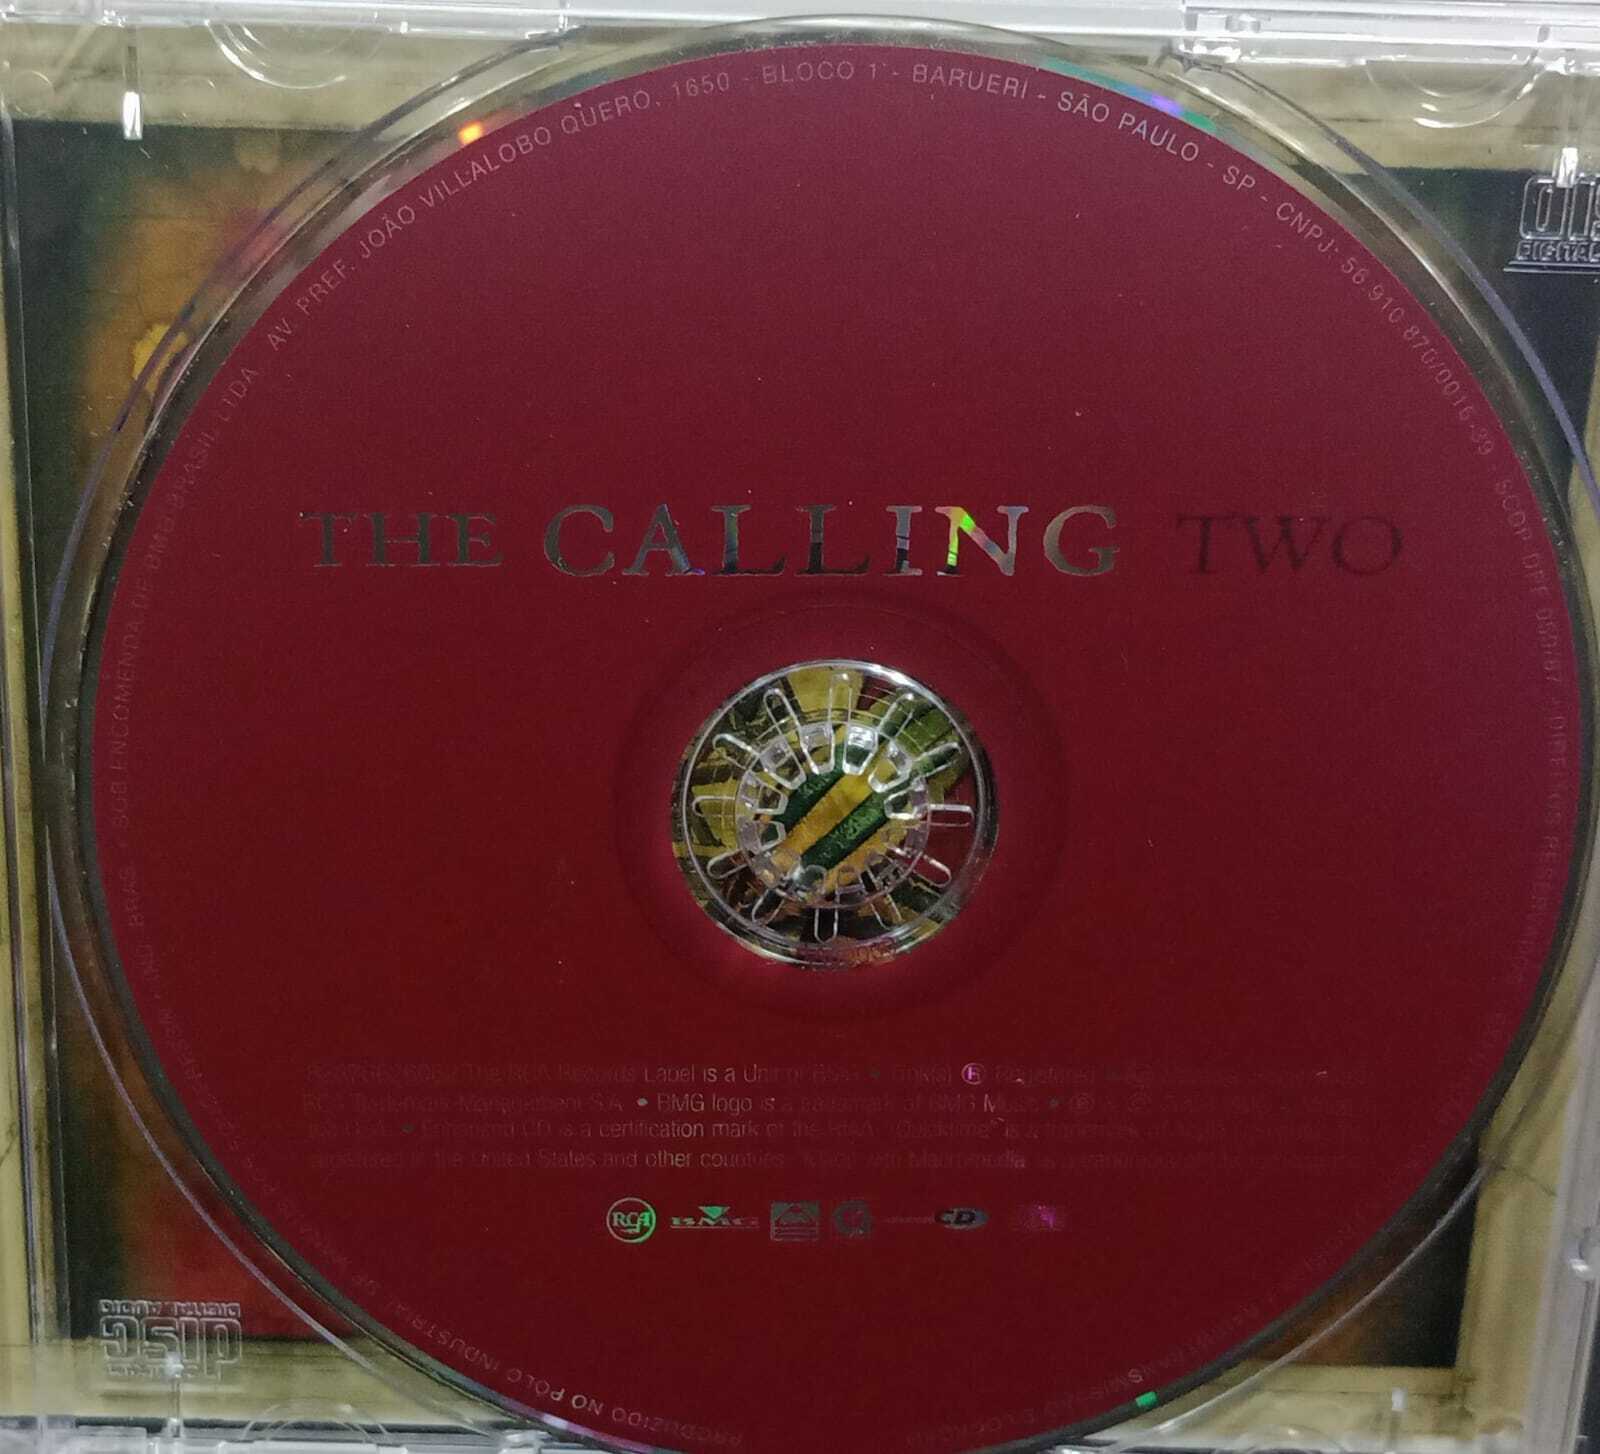 CD - Calling The - Two